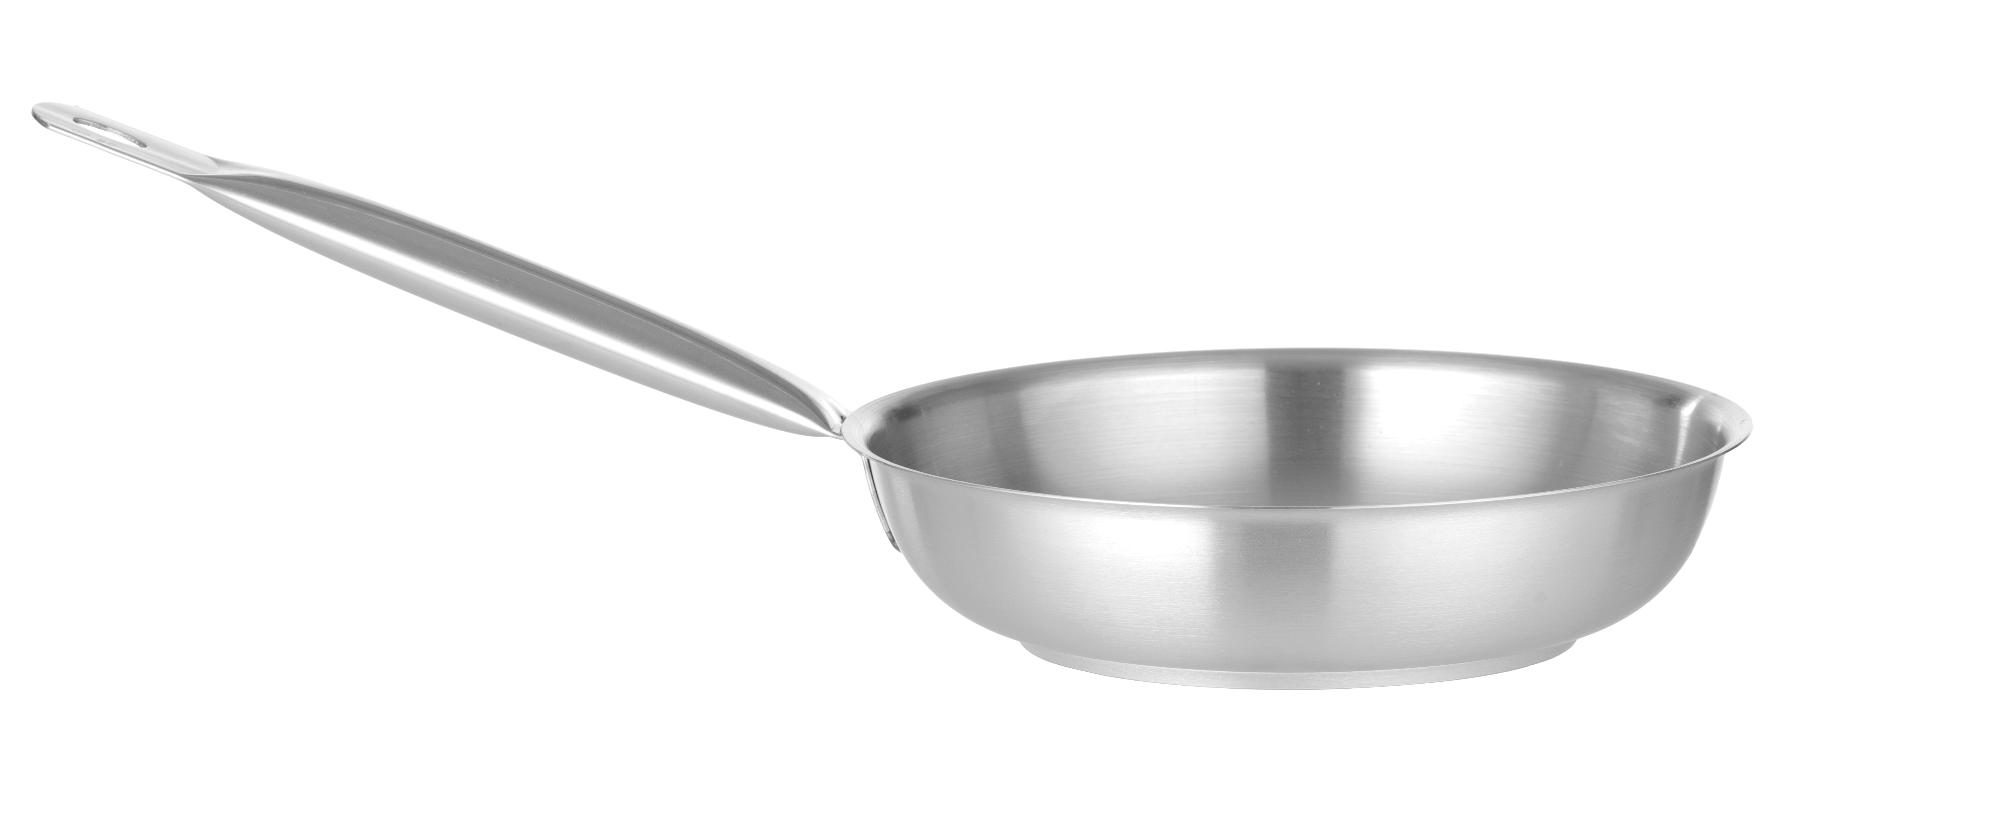 Stainless steel frying pan, 320mm